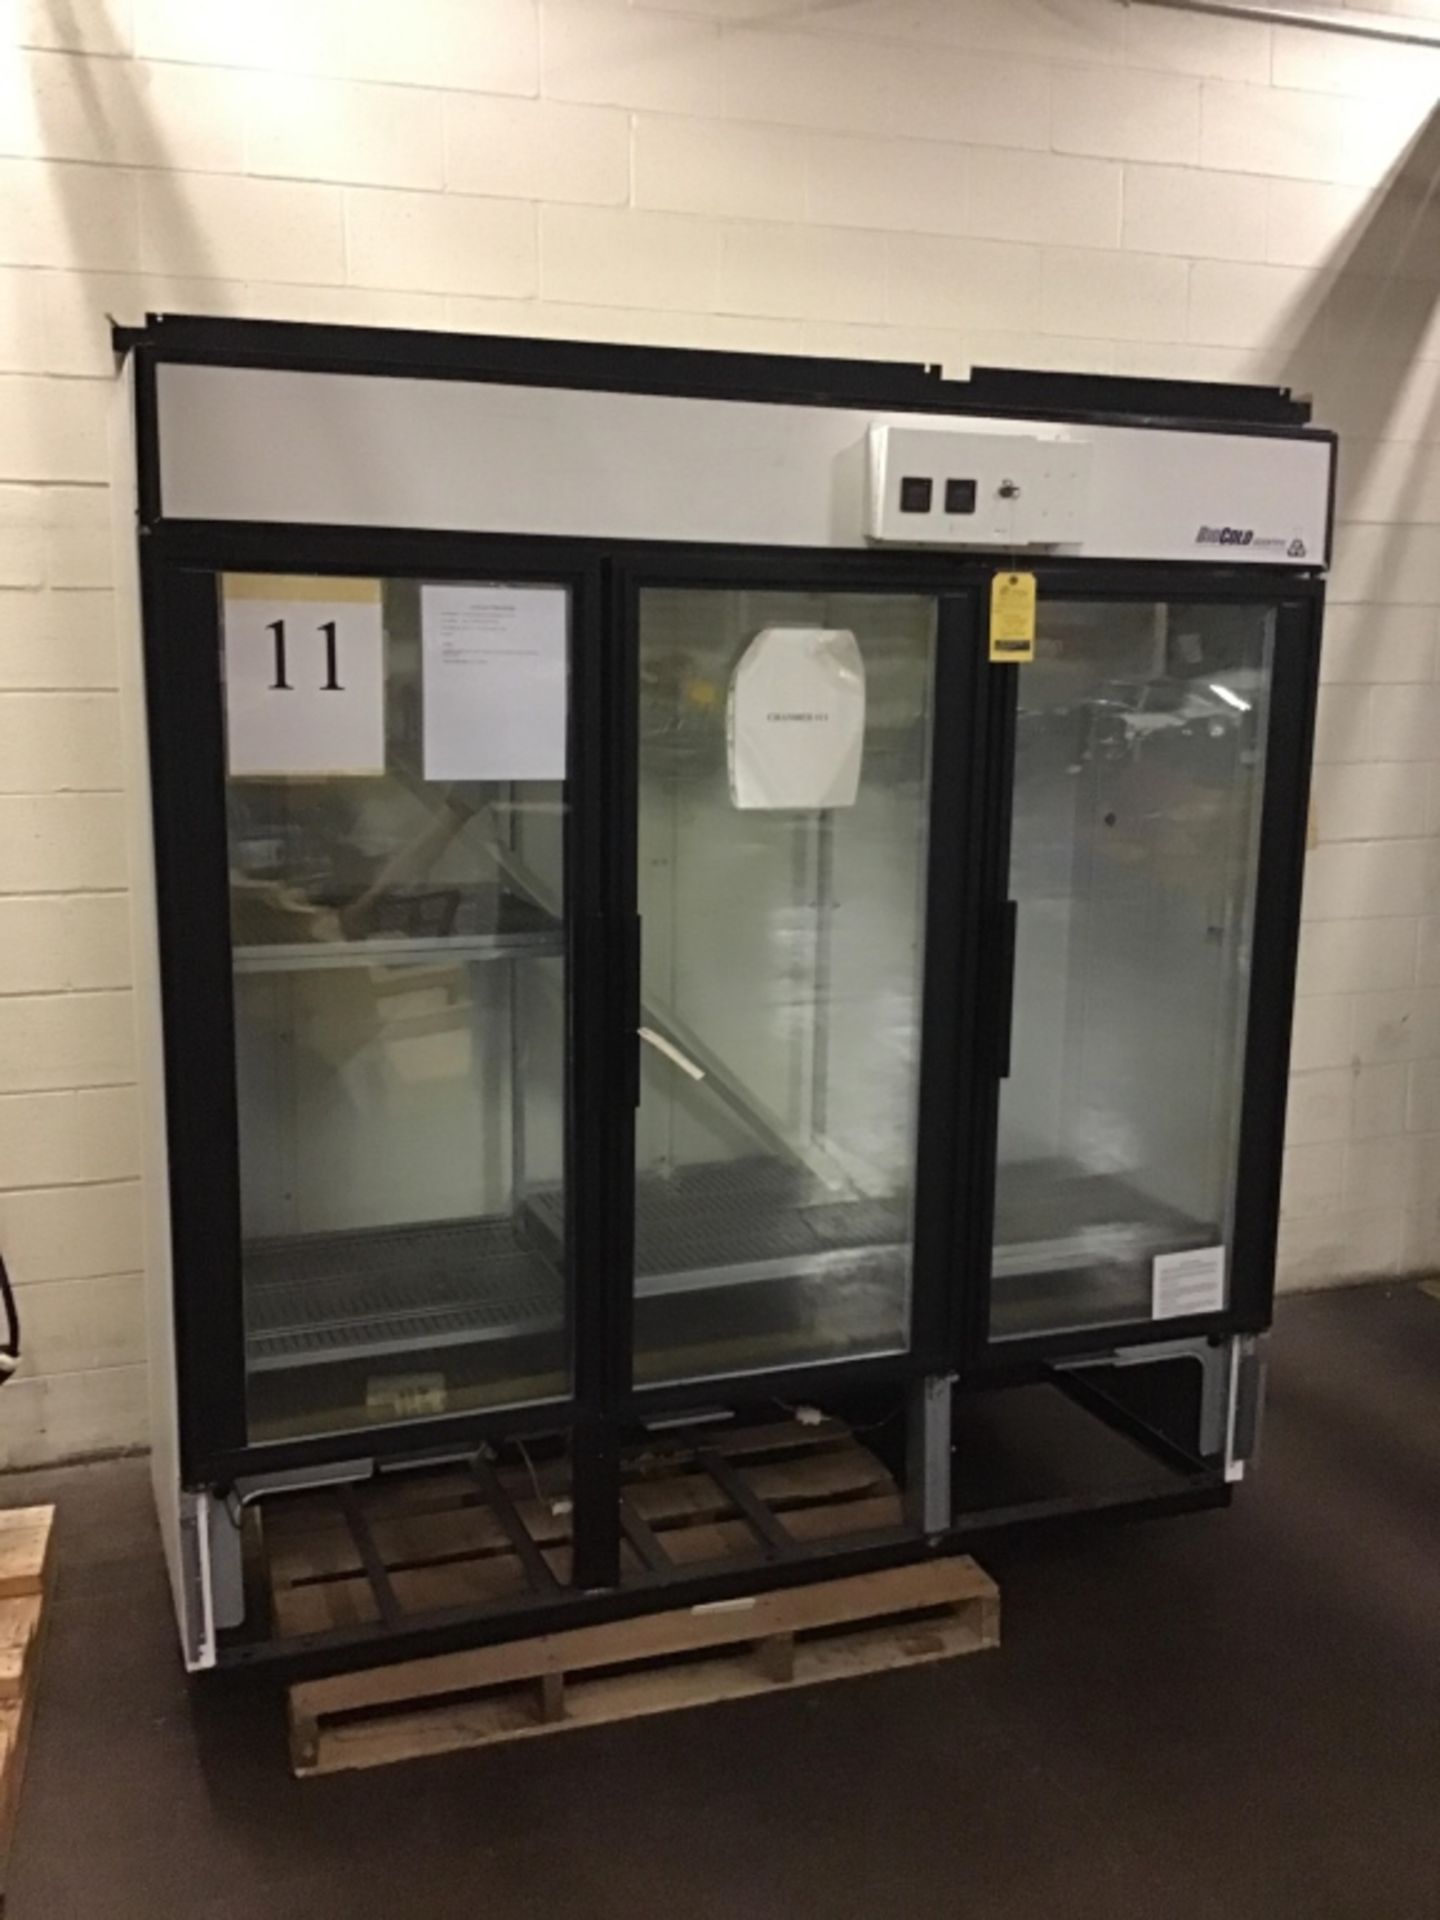 Biocold scientific environmental chamber , looks to be missing compressor